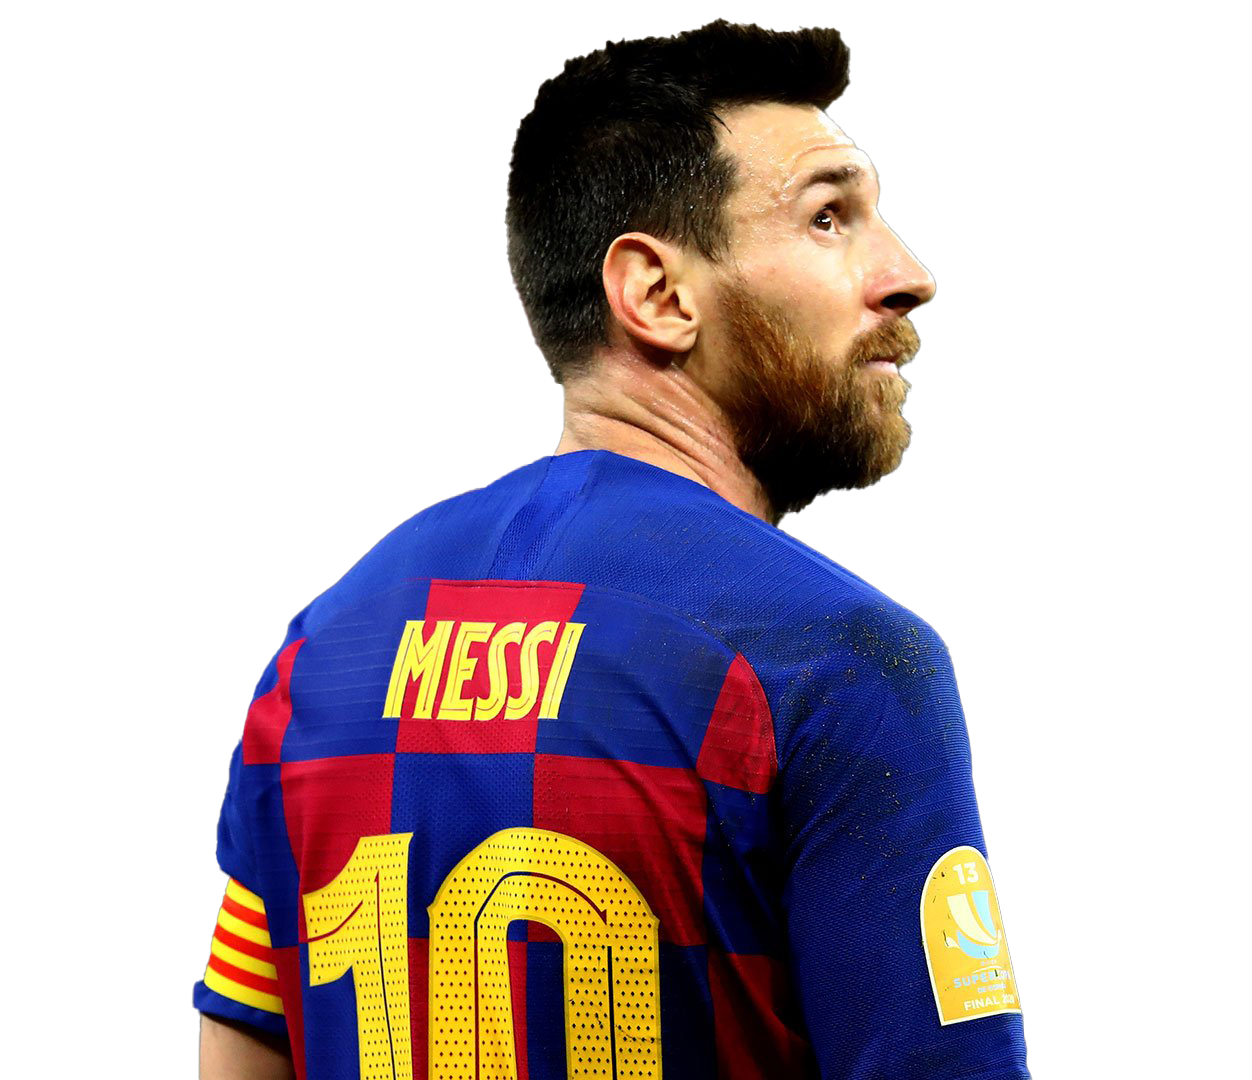 Messi Png Image File - PNG All